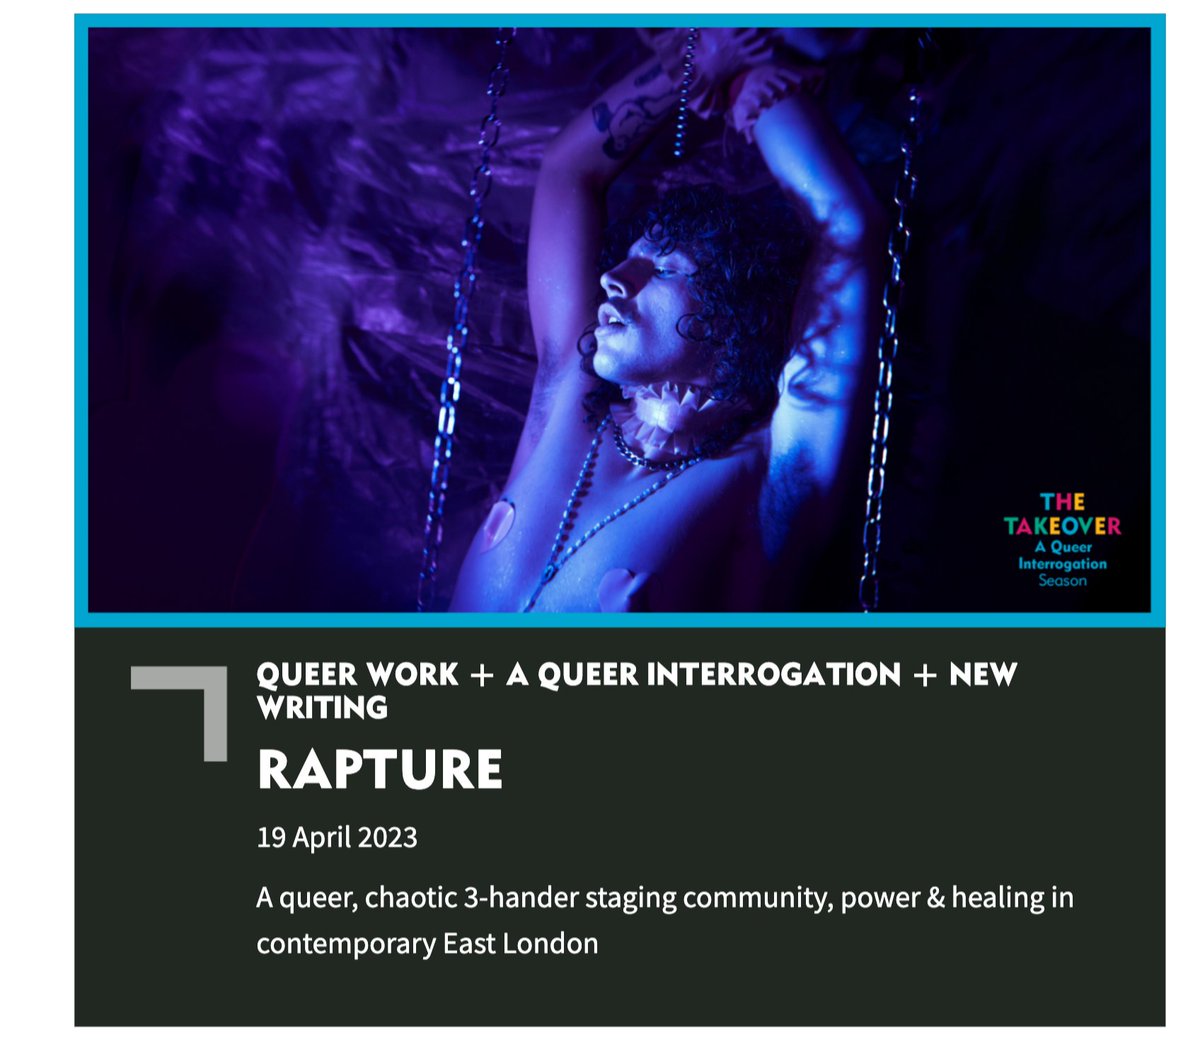 Are you excited? RAPTURE IS BACK 😈 Fresh from a ★★★★★ run at @VaultFestival, we’re thrilled to announce our transfer to the @KingsHeadThtr to the Opening Night of their Queer Interrogation season!
🗓️ 9pm, 19th April
🎟 bit.ly/3GkCHMz